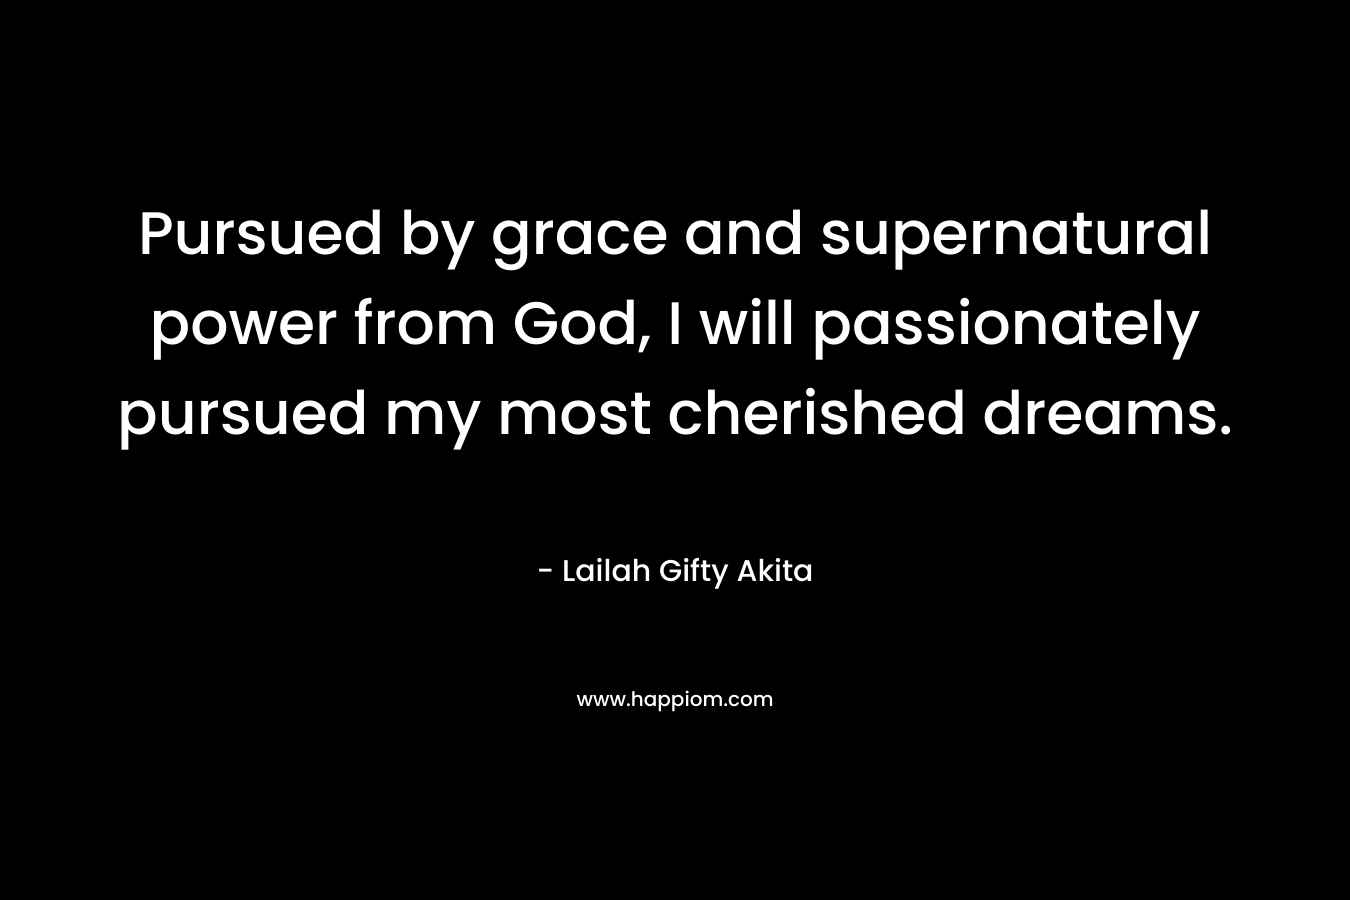 Pursued by grace and supernatural power from God, I will passionately pursued my most cherished dreams. – Lailah Gifty Akita